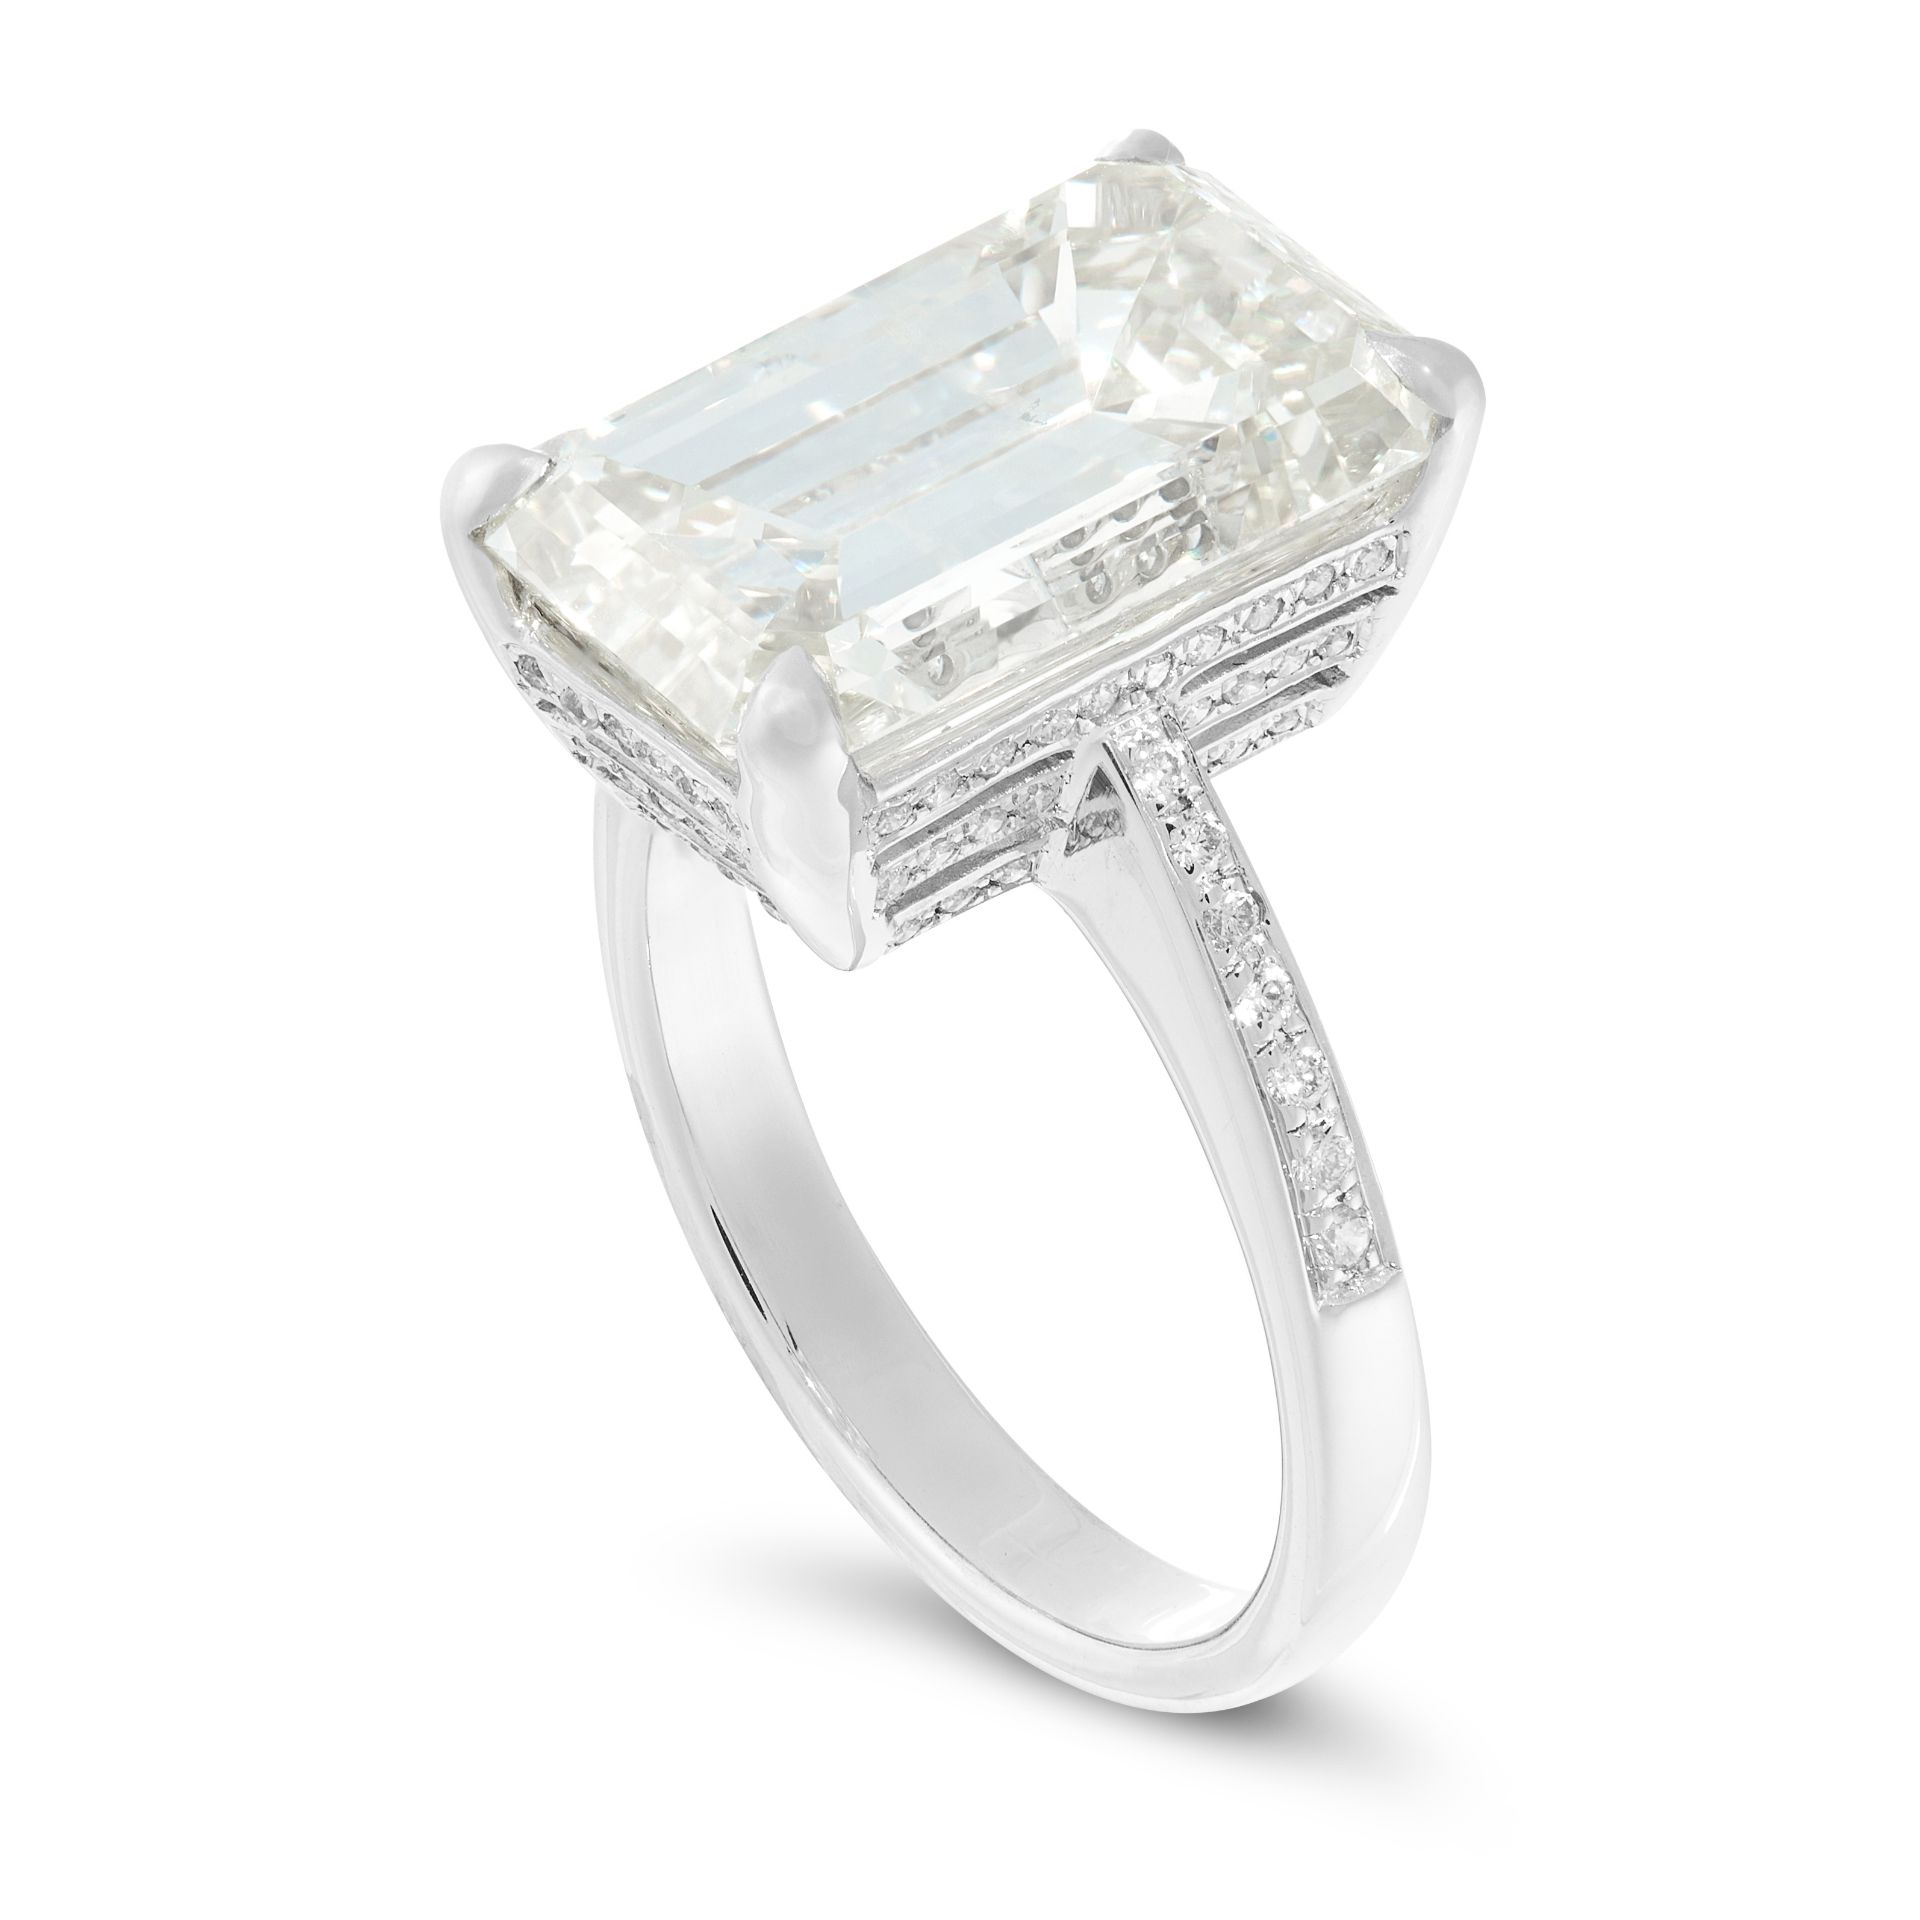 A 10.02 CARAT SOLITAIRE DIAMOND RING set with an emerald cut diamond of 10.02 carats accented by - Image 2 of 2